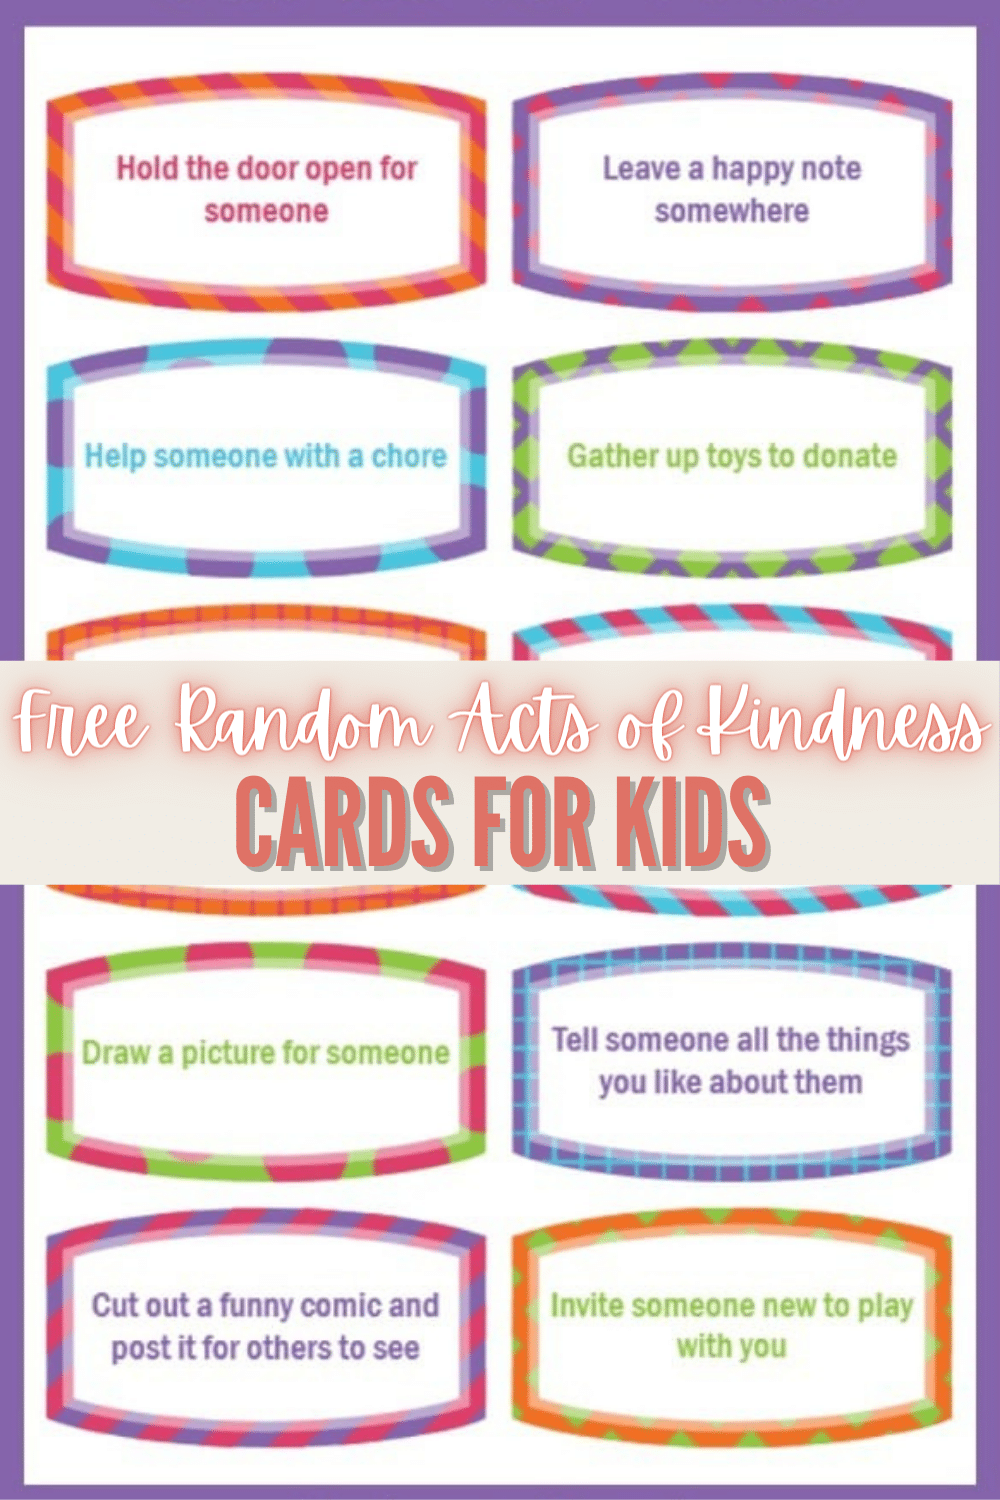 These random acts of kindness cards for kids are an easy way to inspire your children to be kind, charitable, and considerate of others. #randomactsofkindness #forkids #parentingtips #kindness via @wondermomwannab